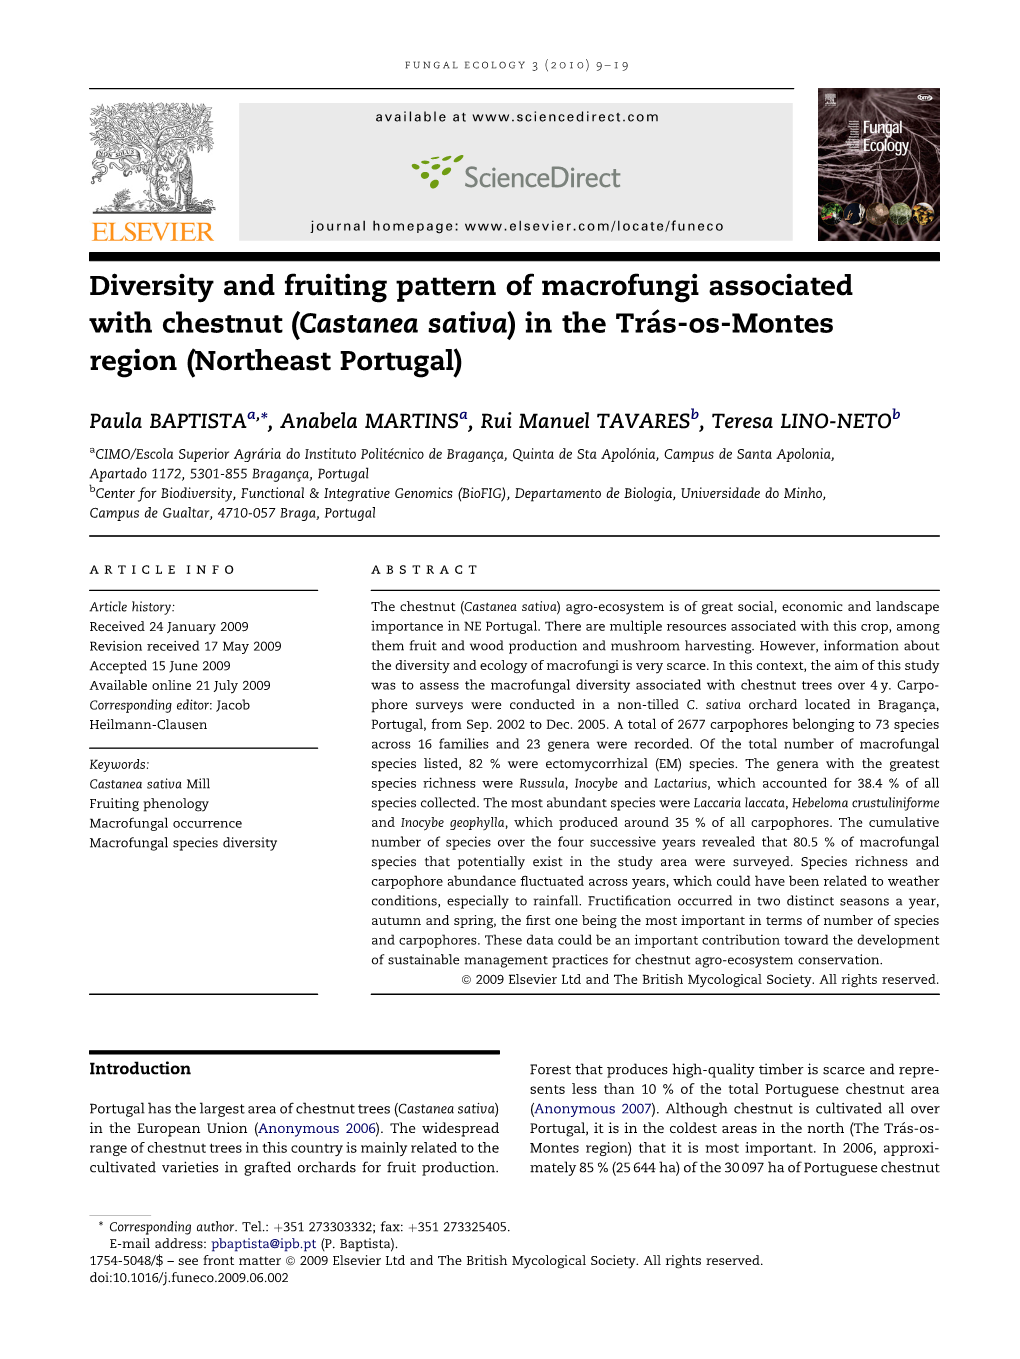 Diversity and Fruiting Pattern of Macrofungi Associated with Chestnut (Castanea Sativa) in the Tra´S-Os-Montes Region (Northeast Portugal)